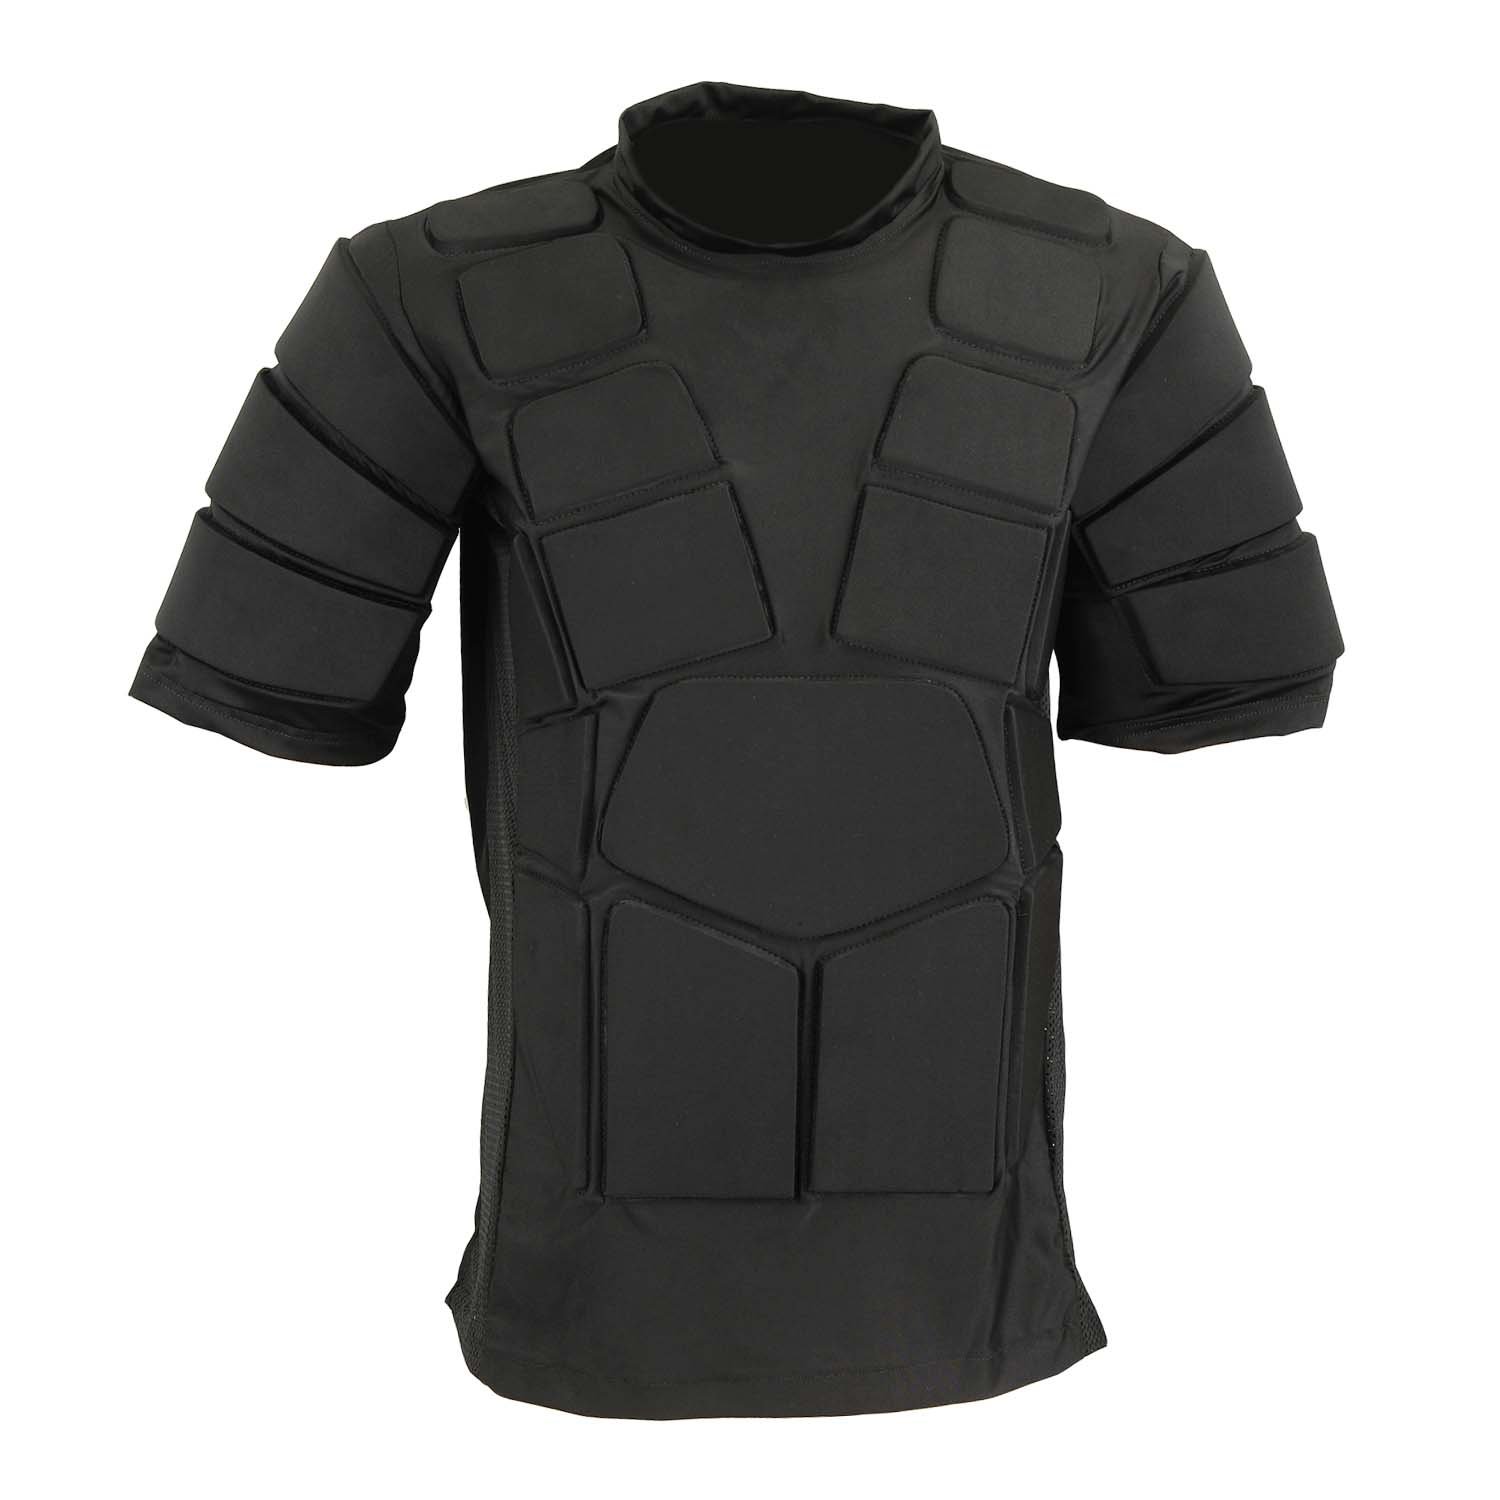 Chest body Protector Padded Paintball Vest - Large